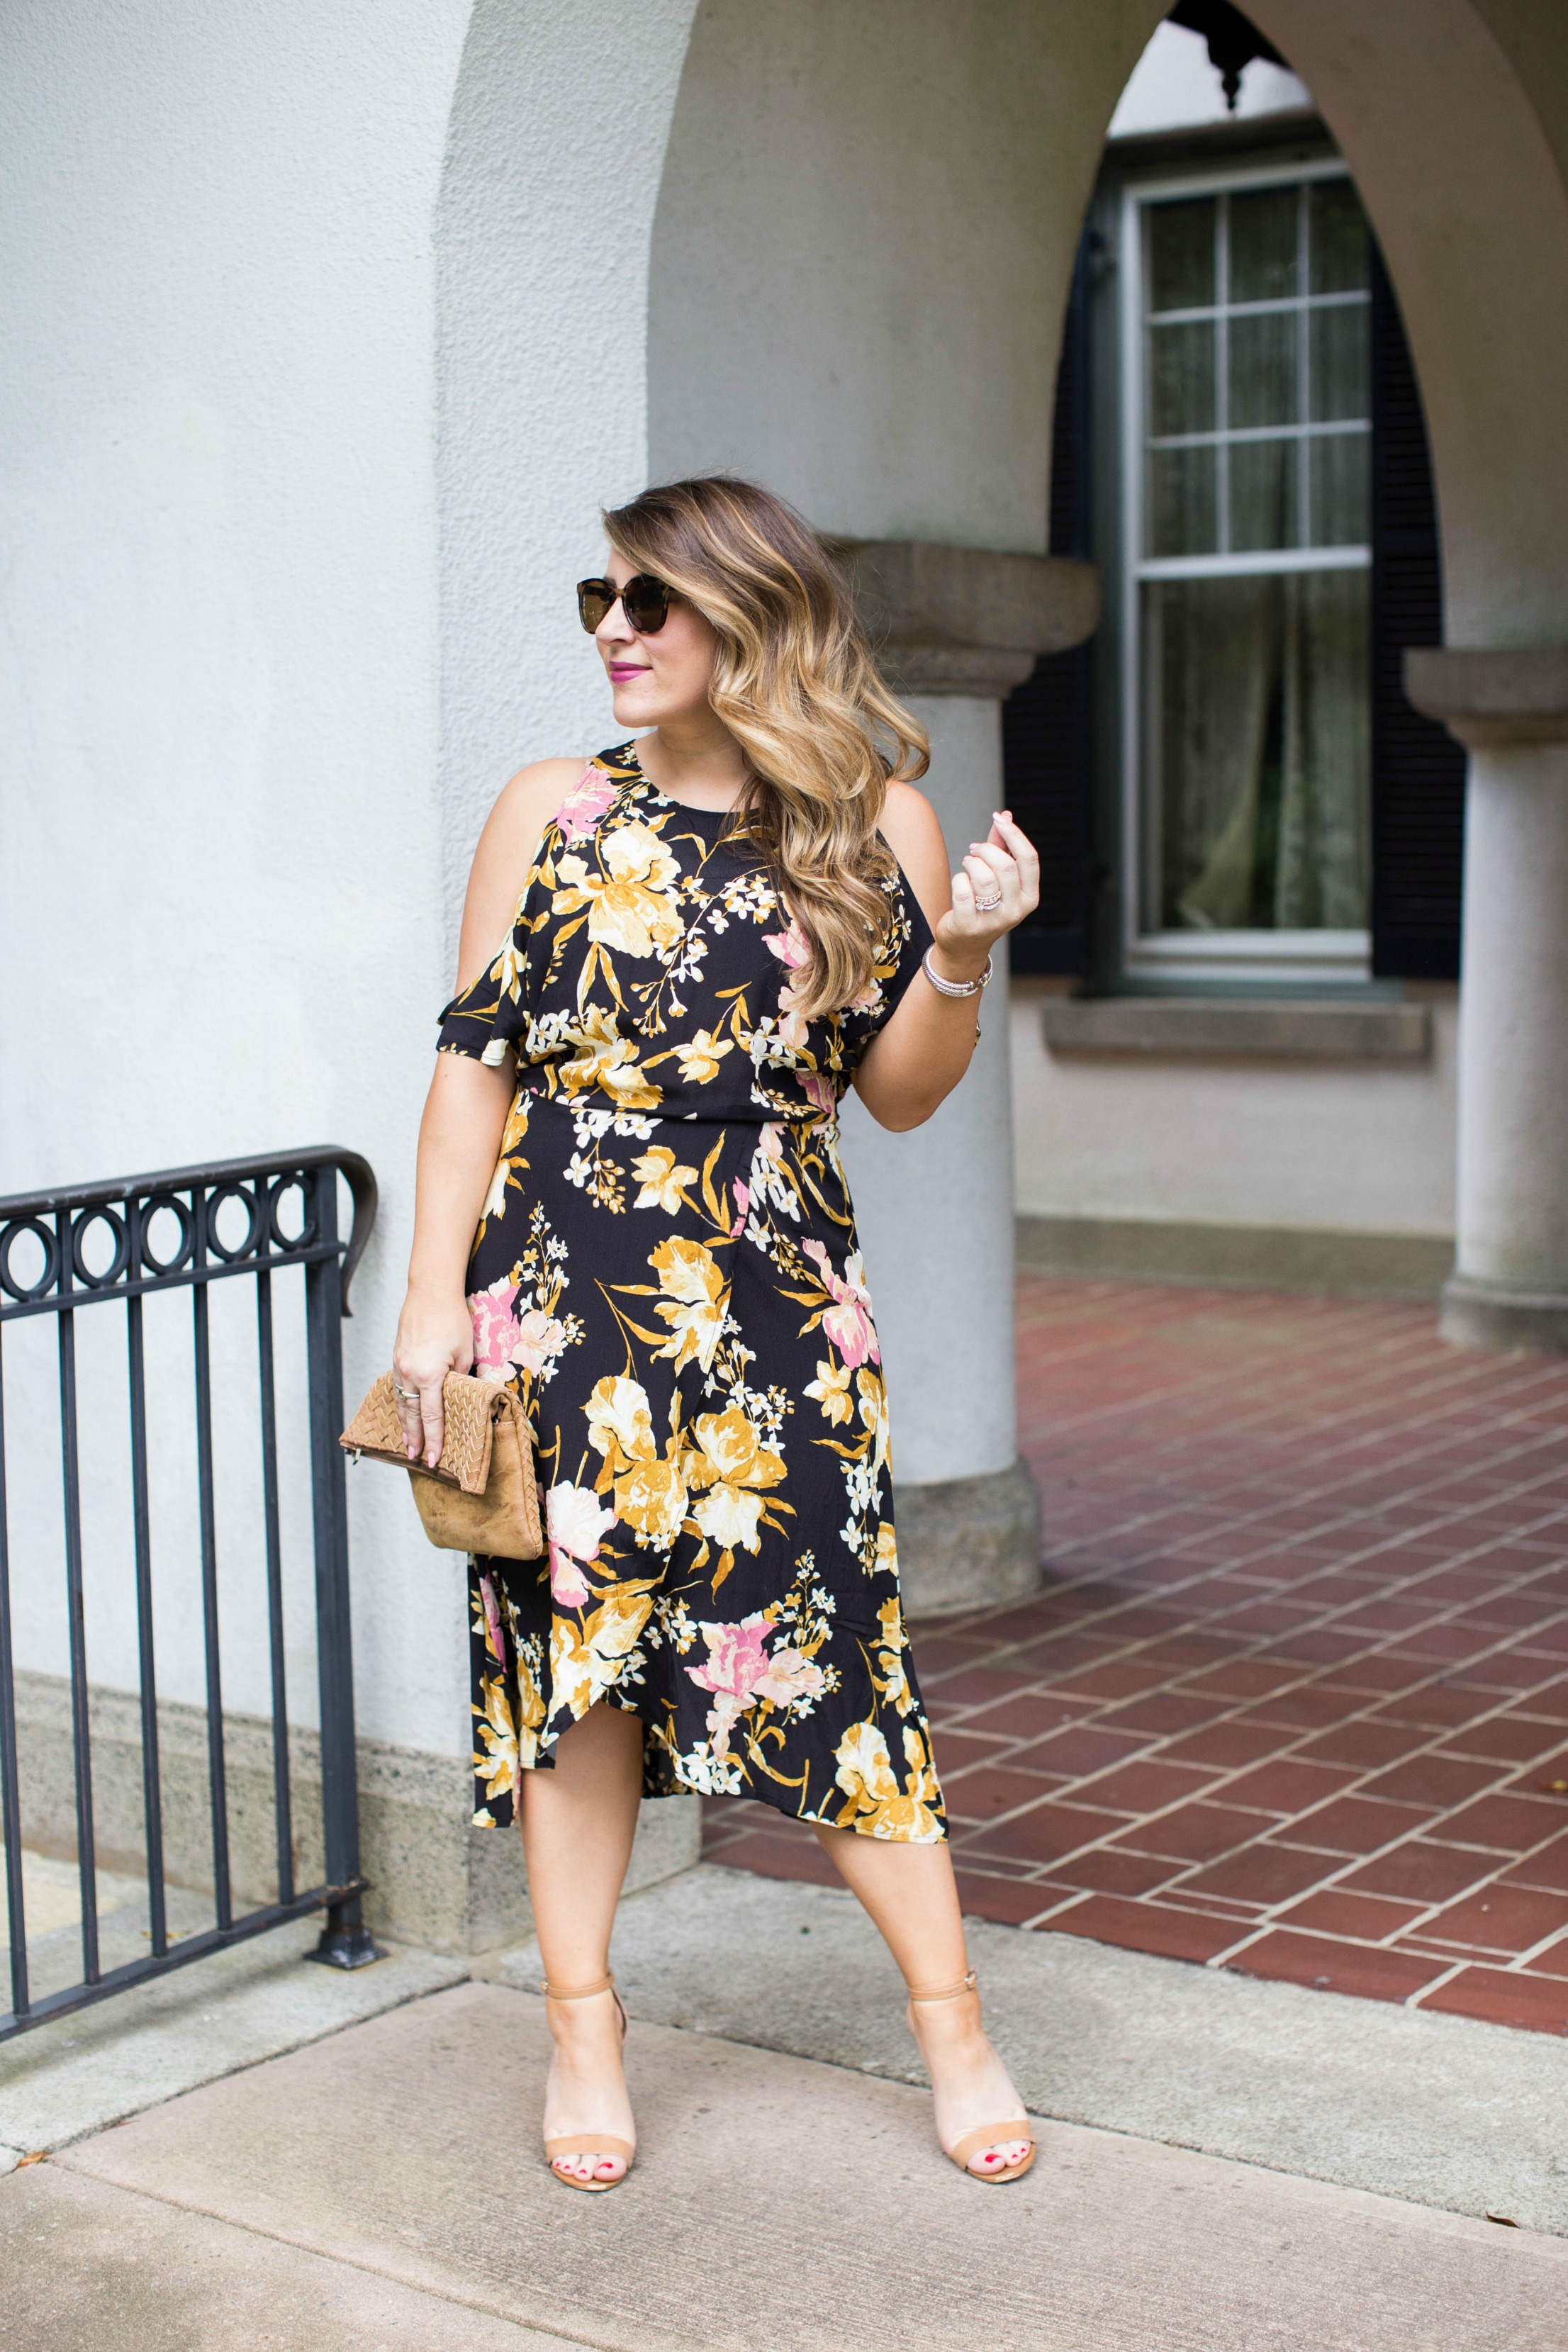 Summer Dress to Fall Transition by NC fashion blogger Coffee Beans and Bobby Pins